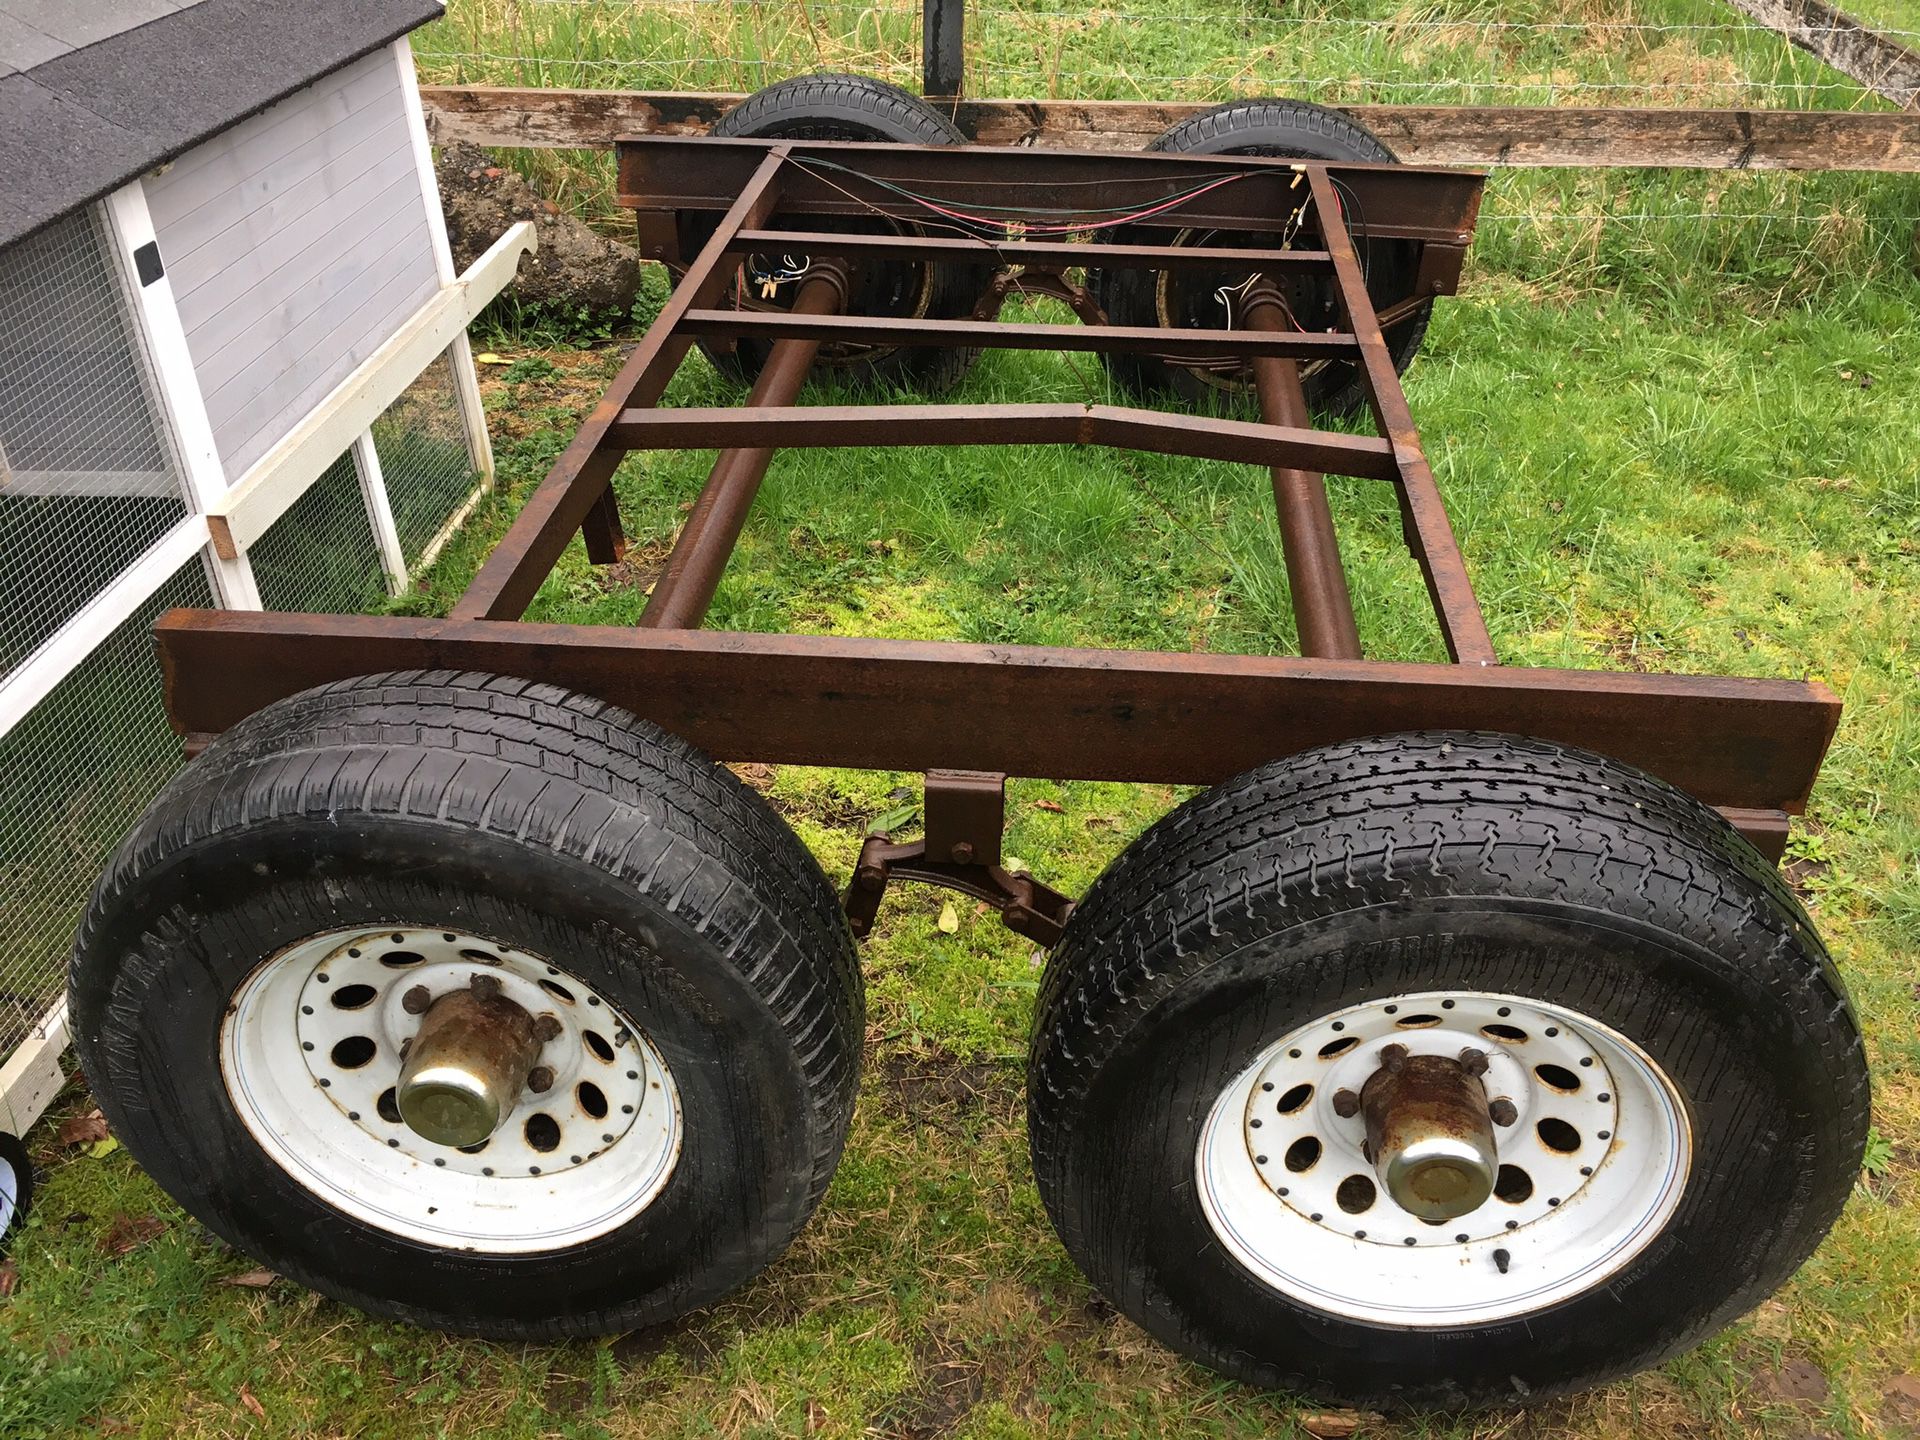 Trailer axle with brakes.